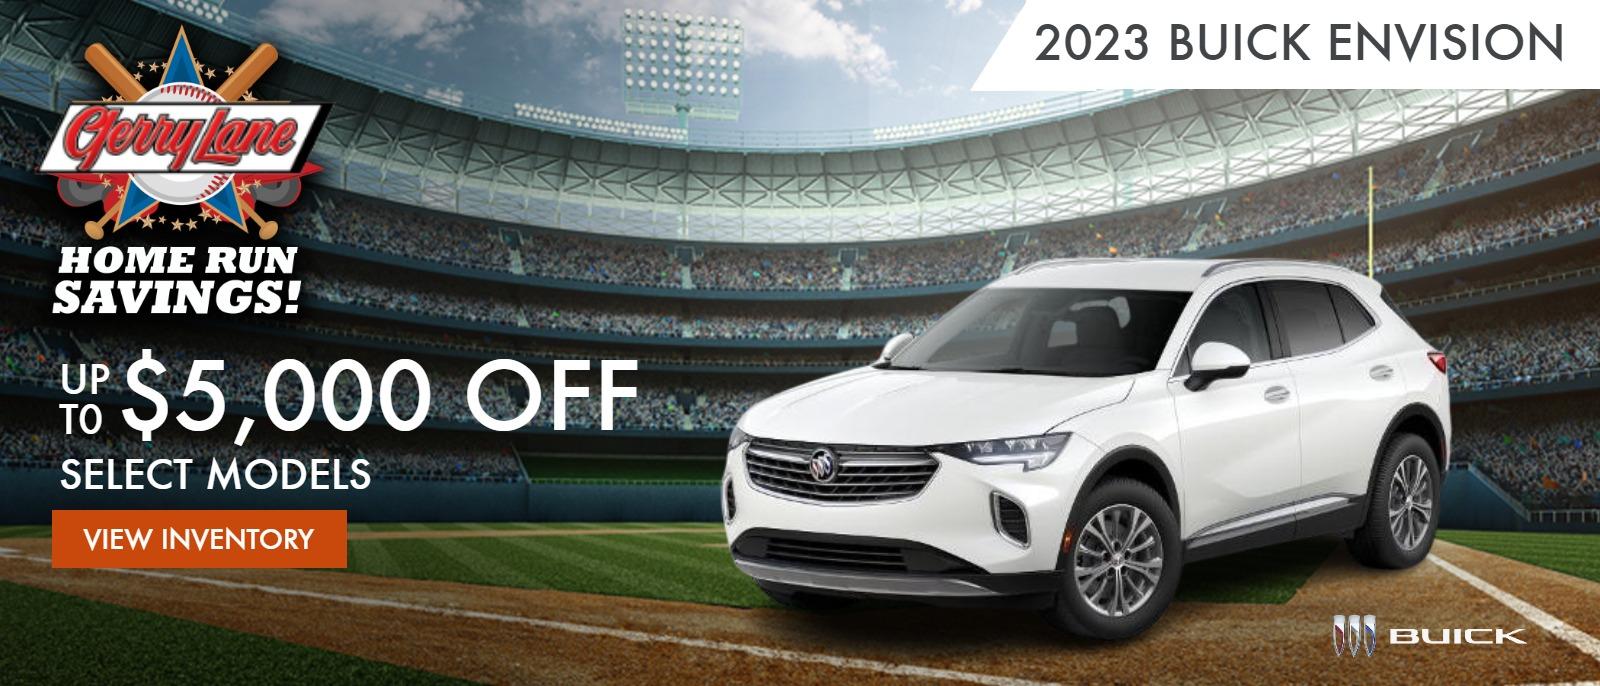 2023 Envision Up to $5,000 Off